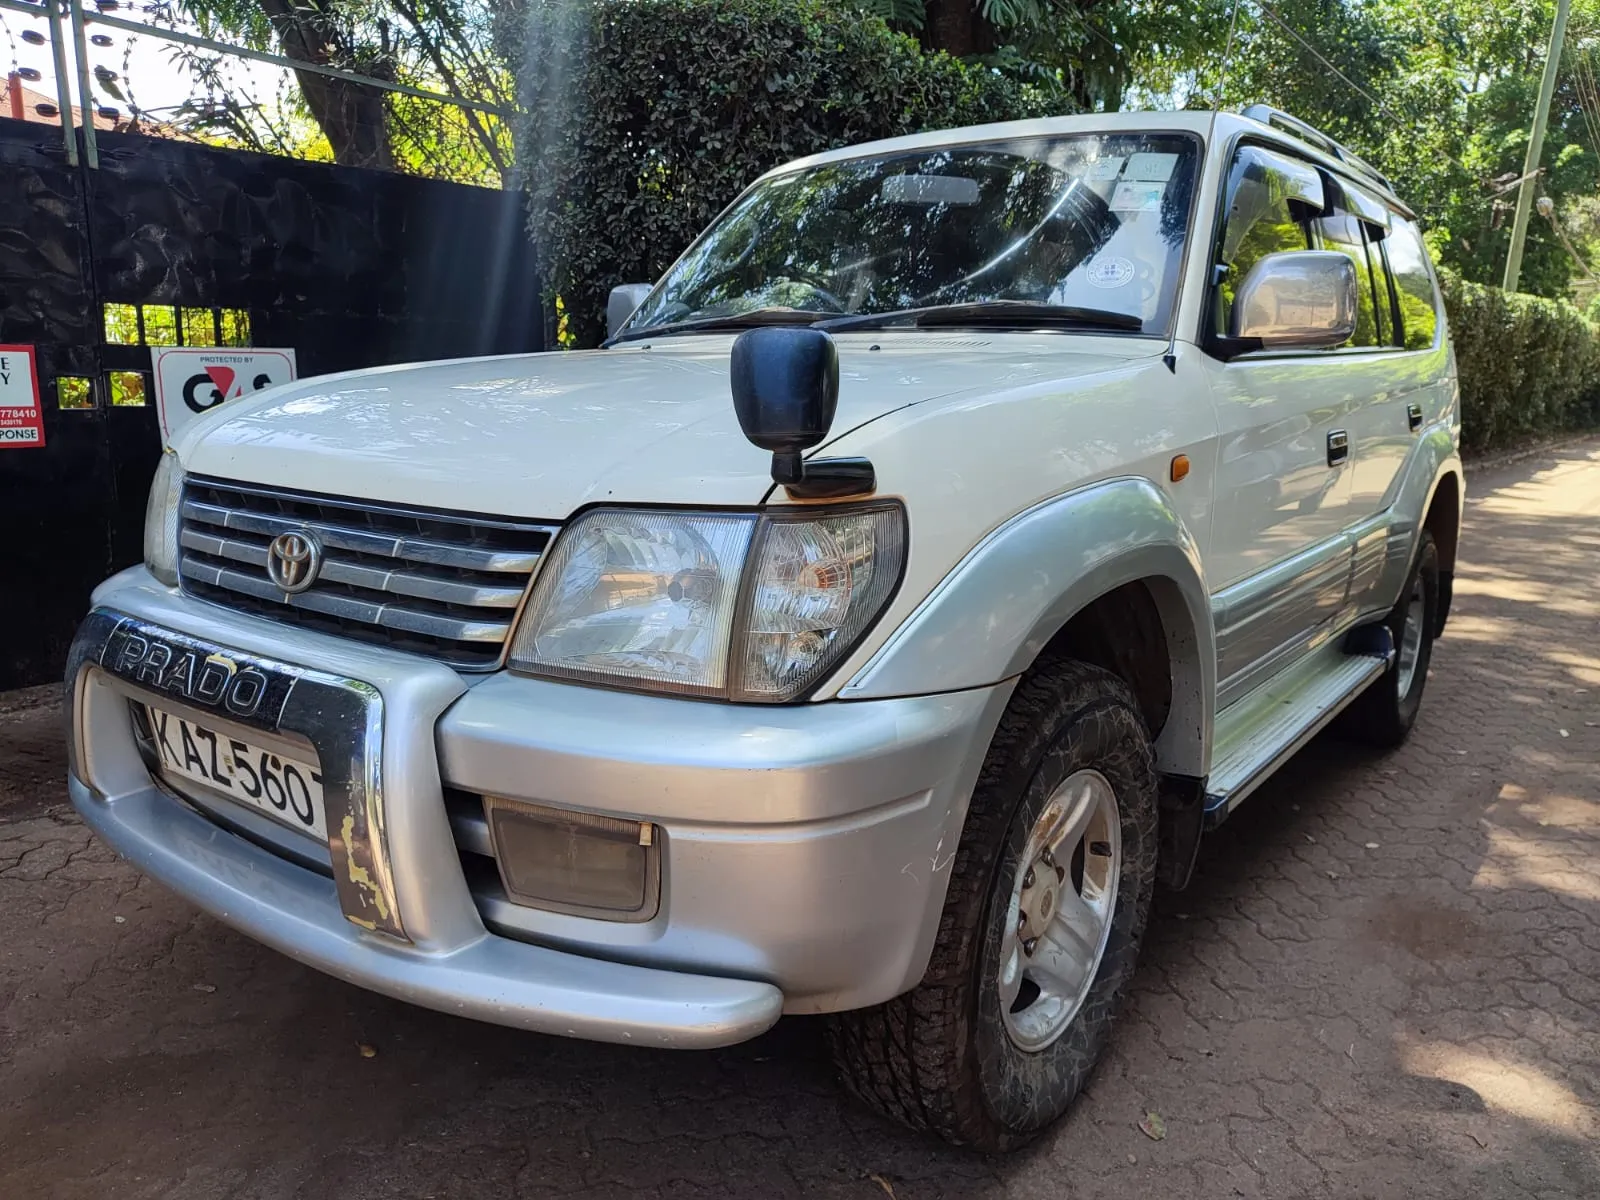 Cars Cars For Sale/Vehicles-Toyota Prado 95 CLEAN Diesel You Pay 30% Deposit Trade in OK Asian owner 9